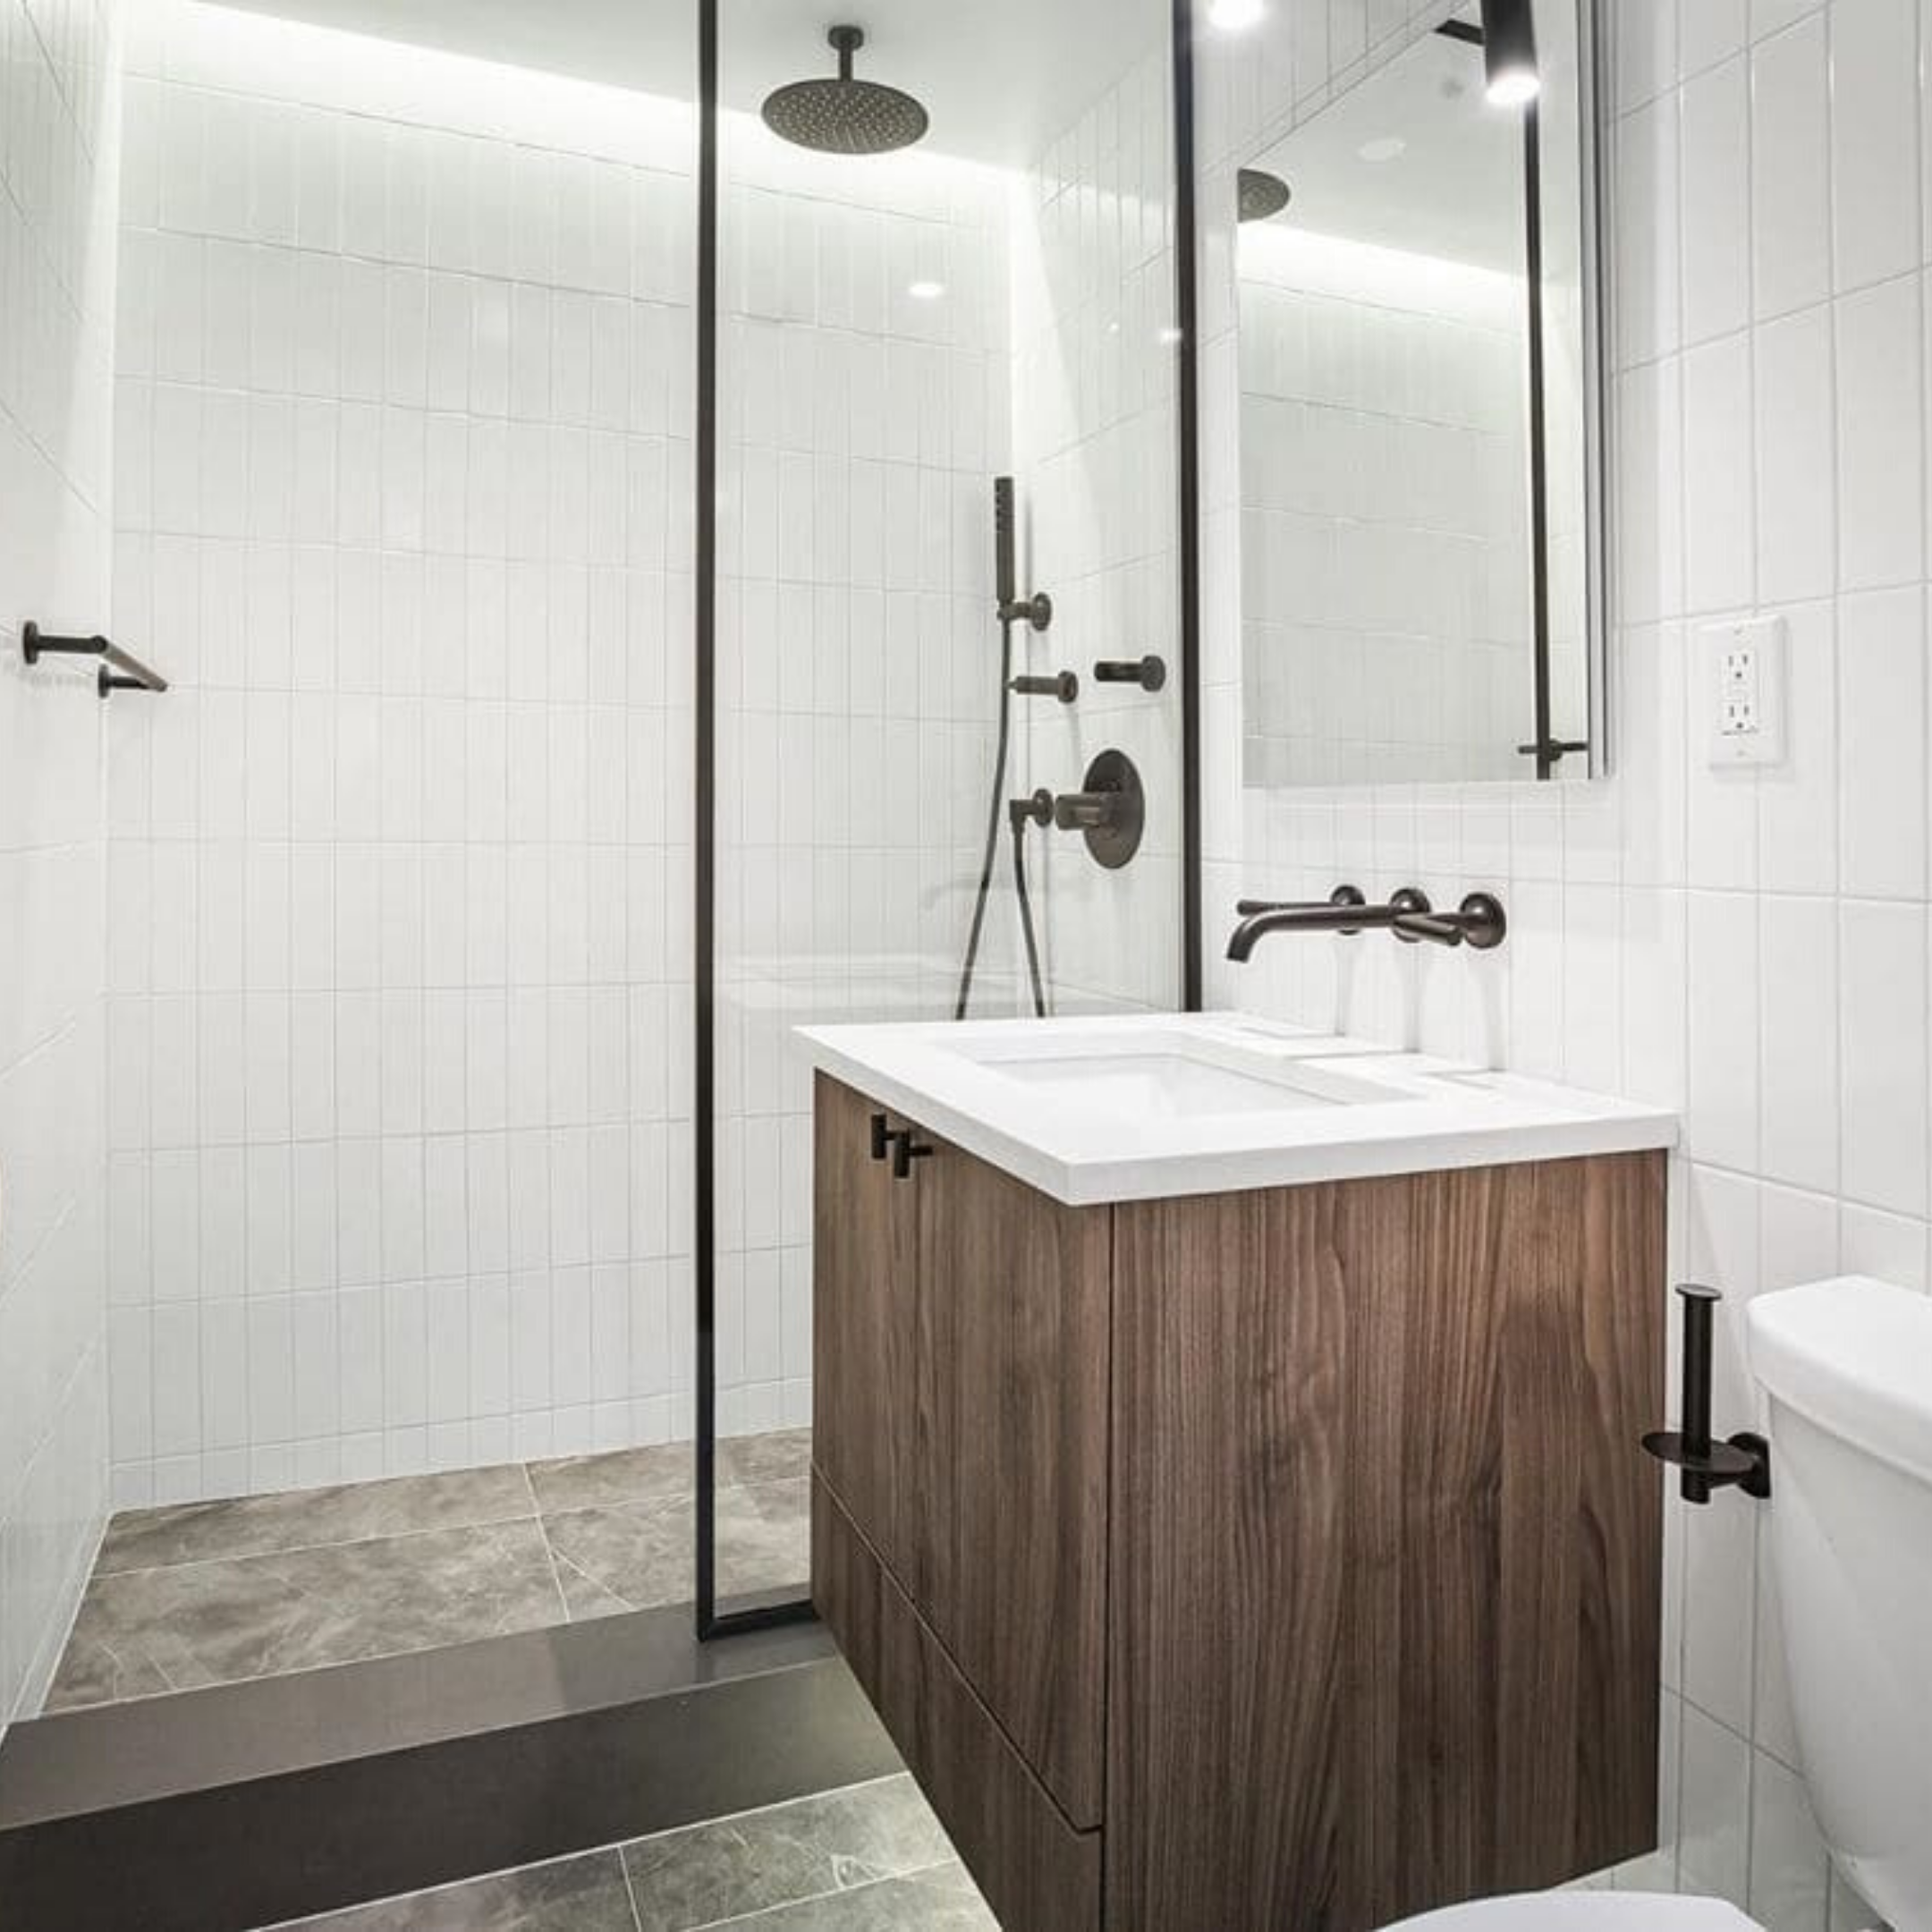 Classic white look subway tiles shown in the bathroom and shower laid vertically on the wall